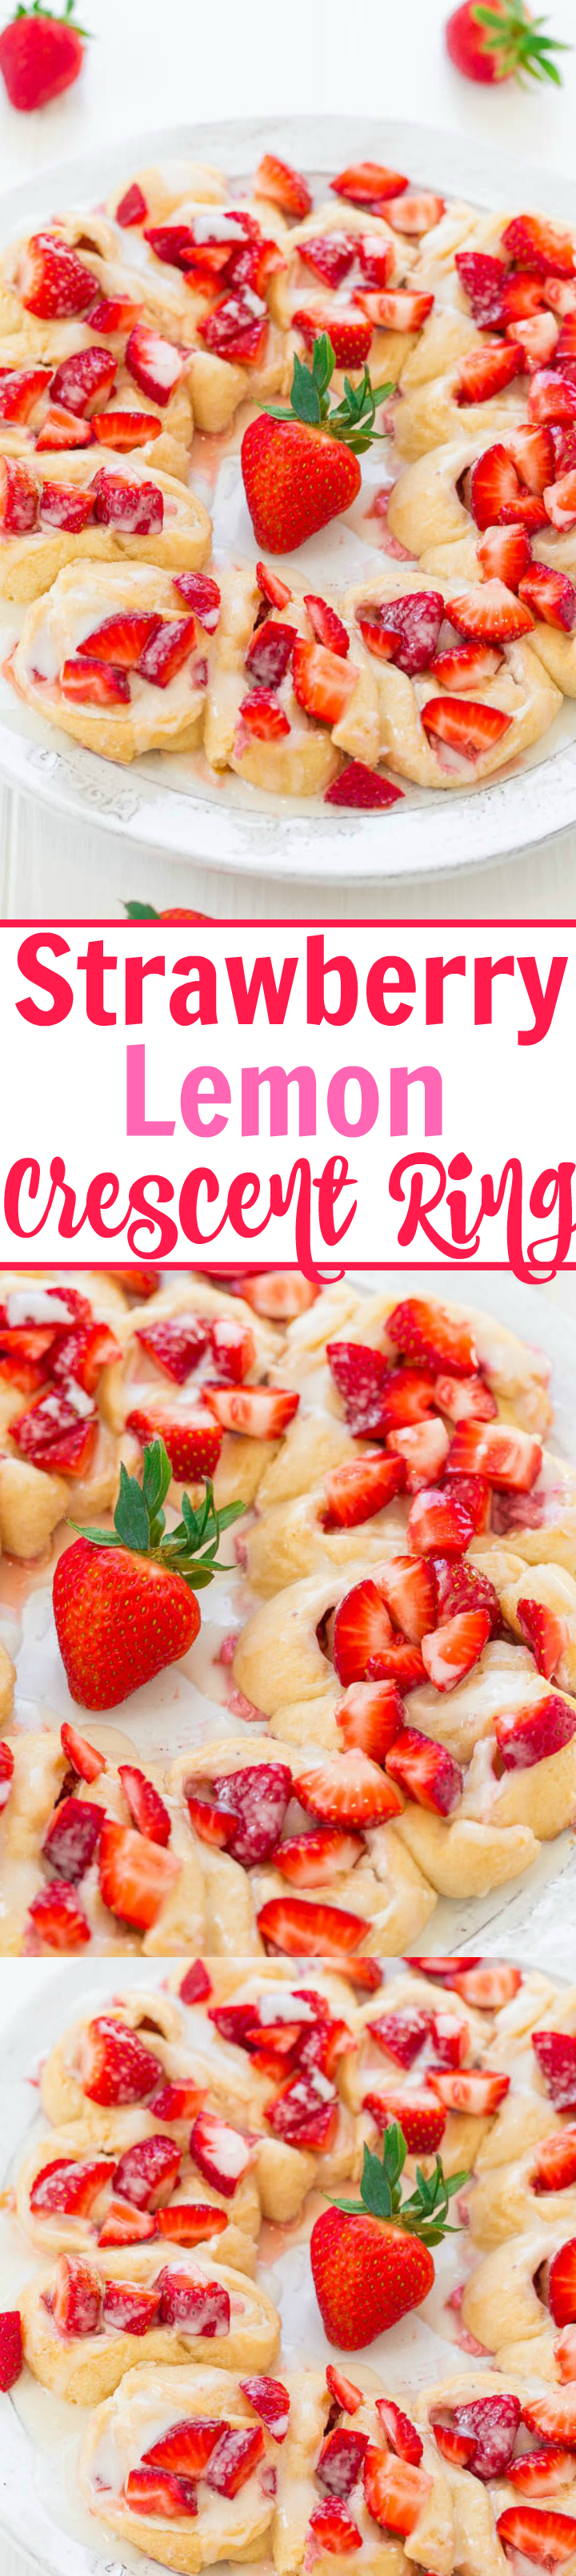 Strawberry Lemon Crescent Ring - Strawberries galore in this EASY crescent ring that's filled with lemony cream cheese and finished with sweet glaze!! Perfect for holiday brunches!!